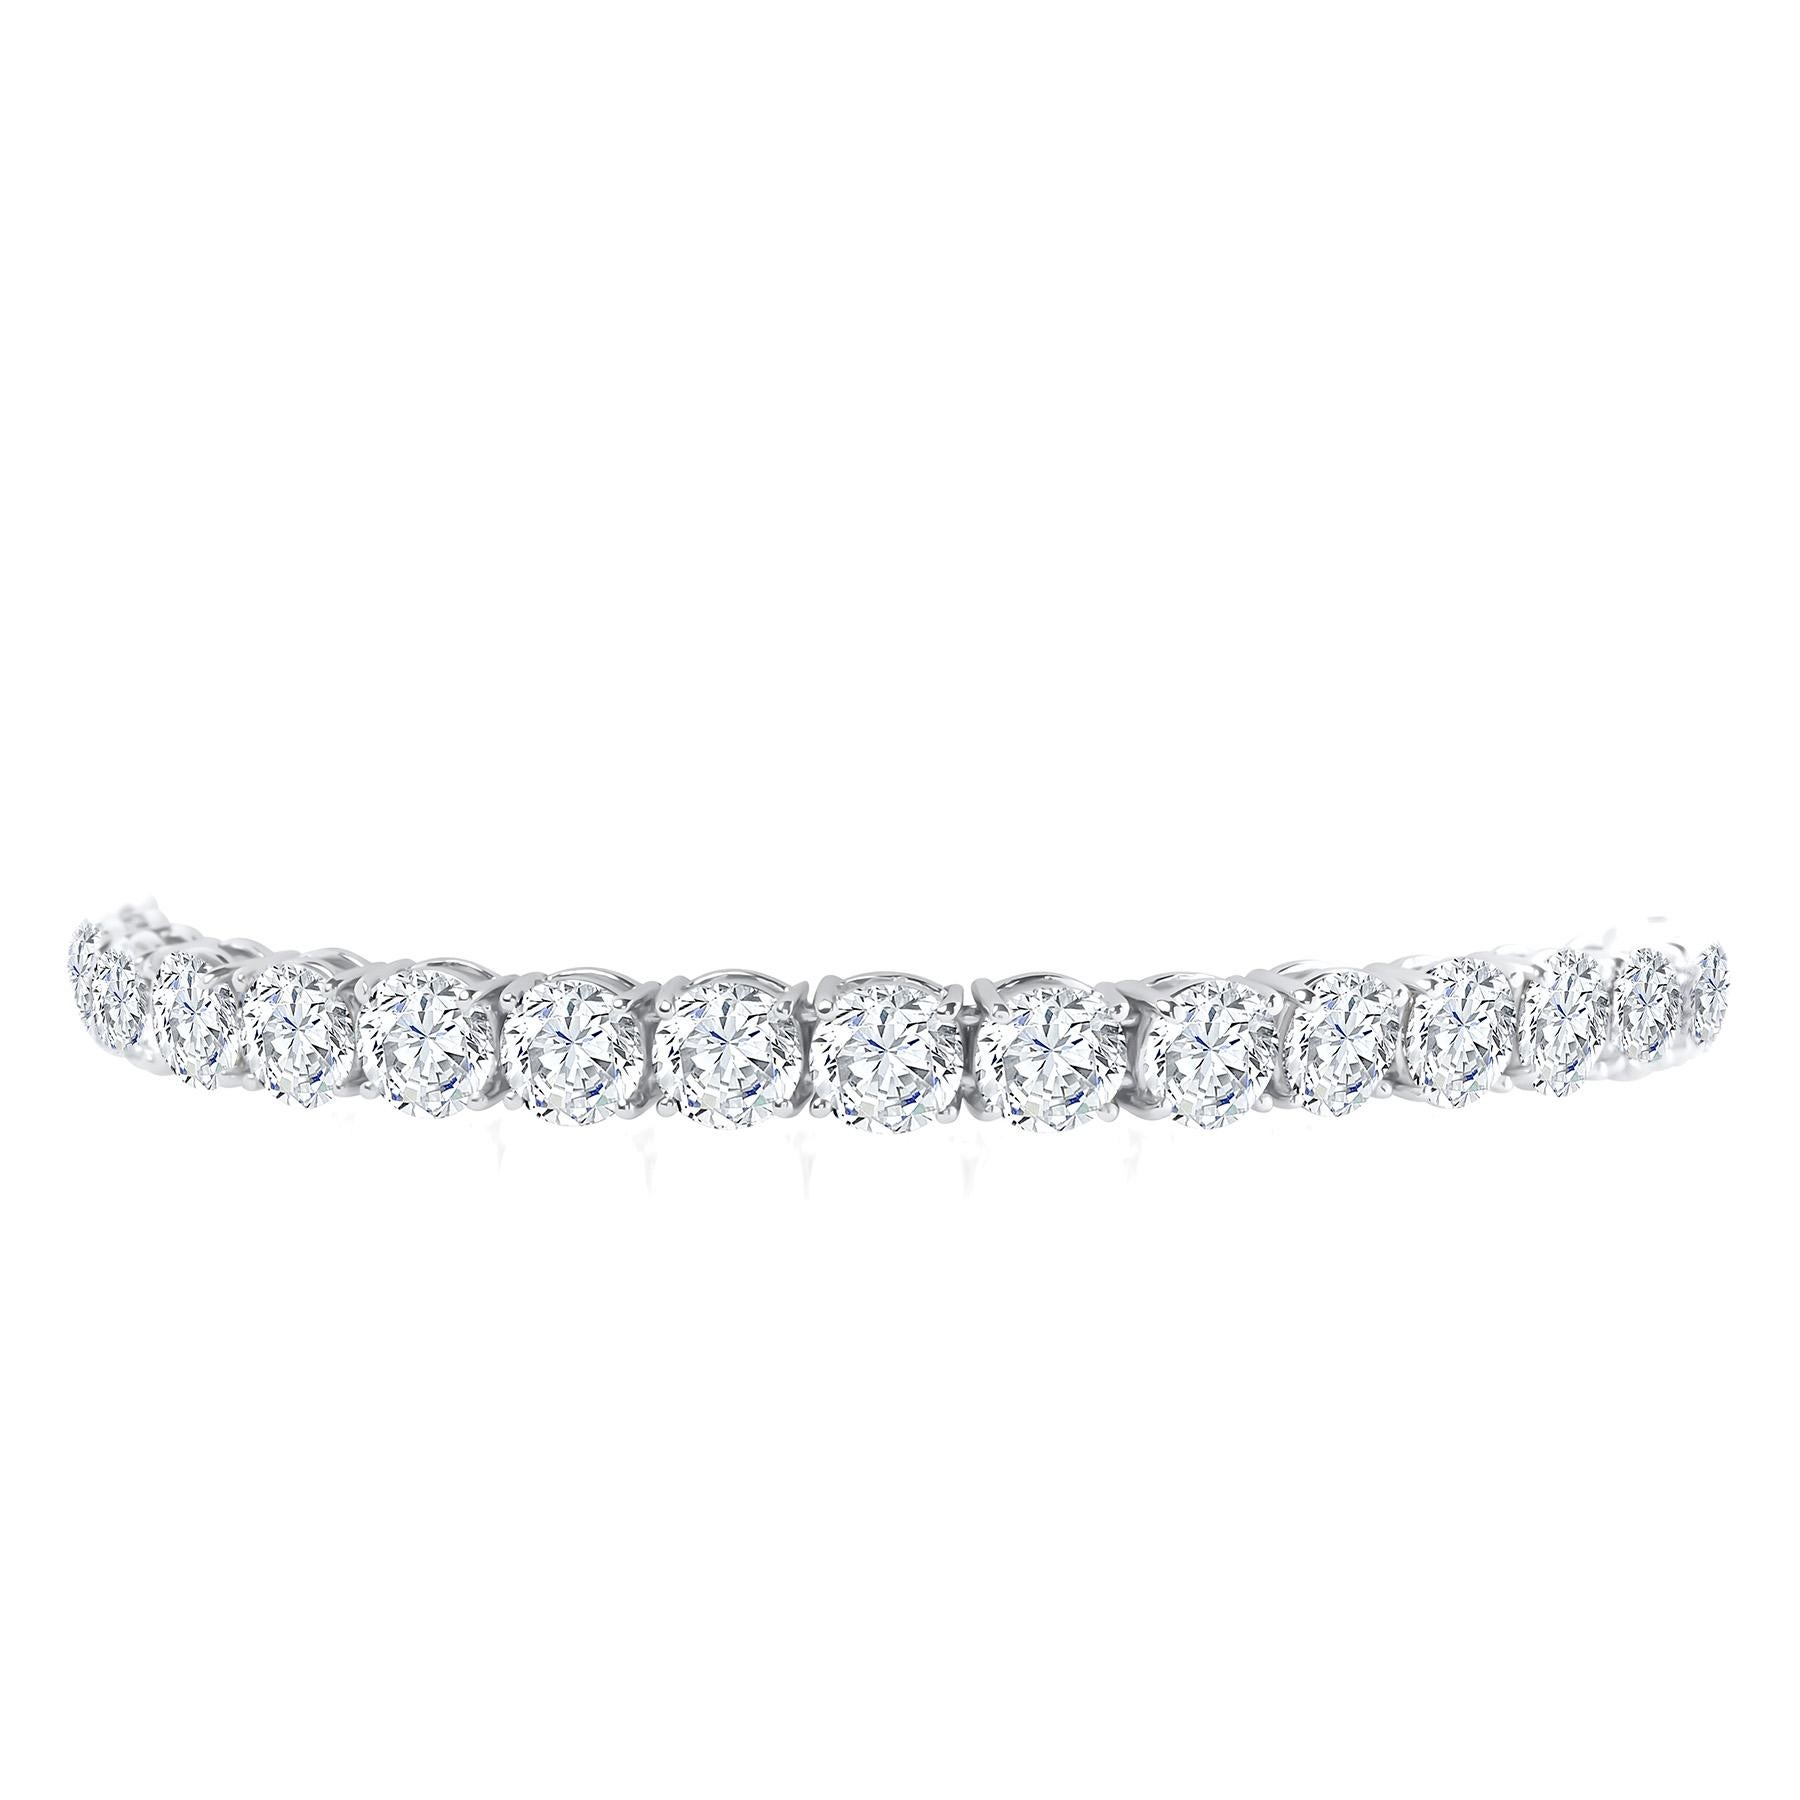 This one of a kind tennis bracelet features 31 ideal brilliant cut diamonds set in hand made platinum. The diamonds in this stunner are E-G color and si clarity. With a 21.90 total carat weight 

Feel free to reach out to us for more information